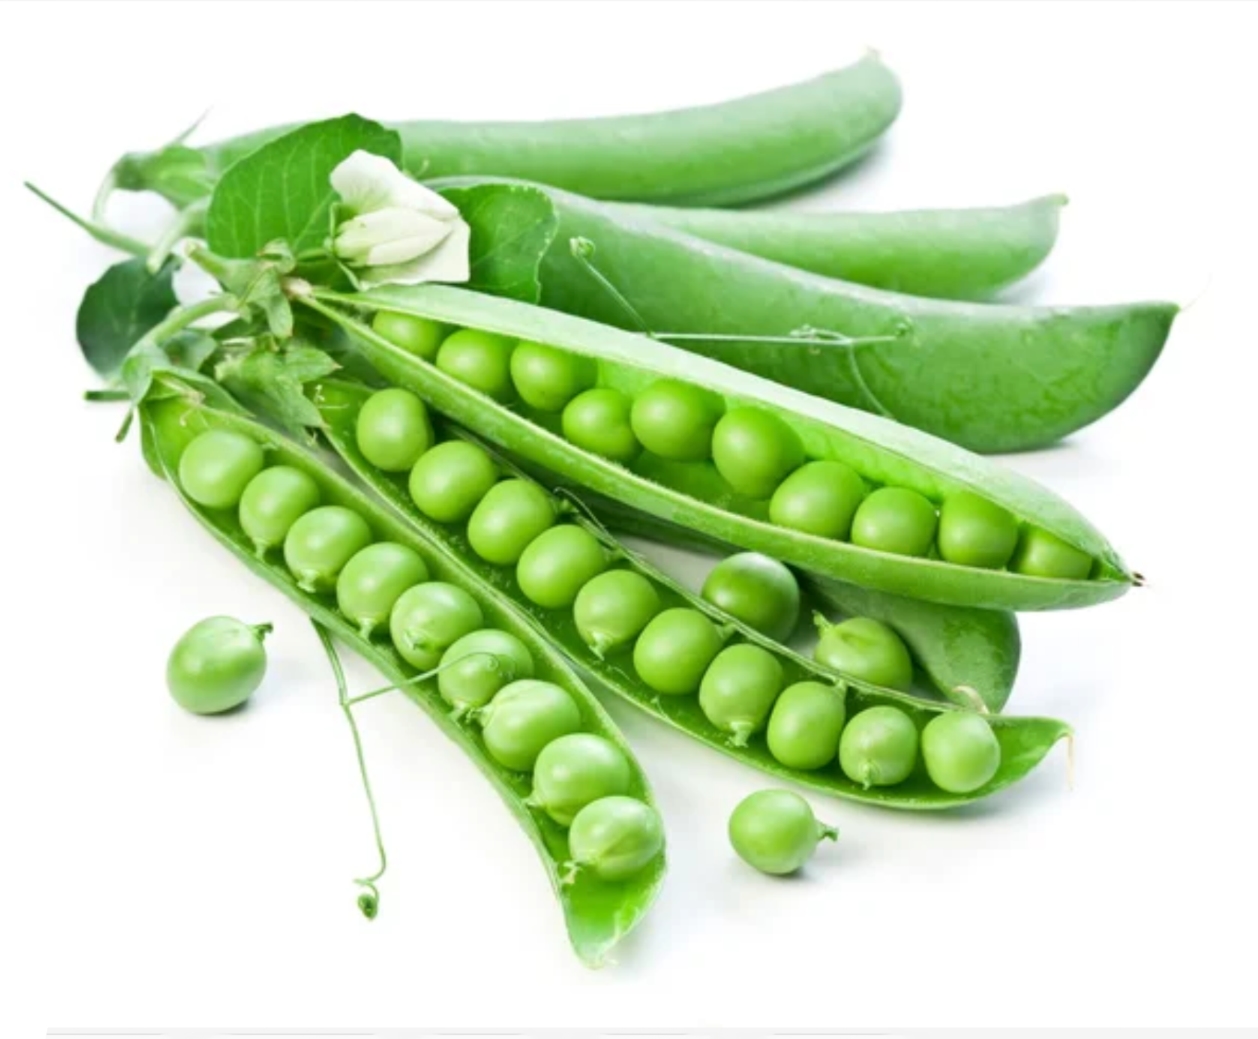 Somerwood Garden pea variety from Royal Seed 